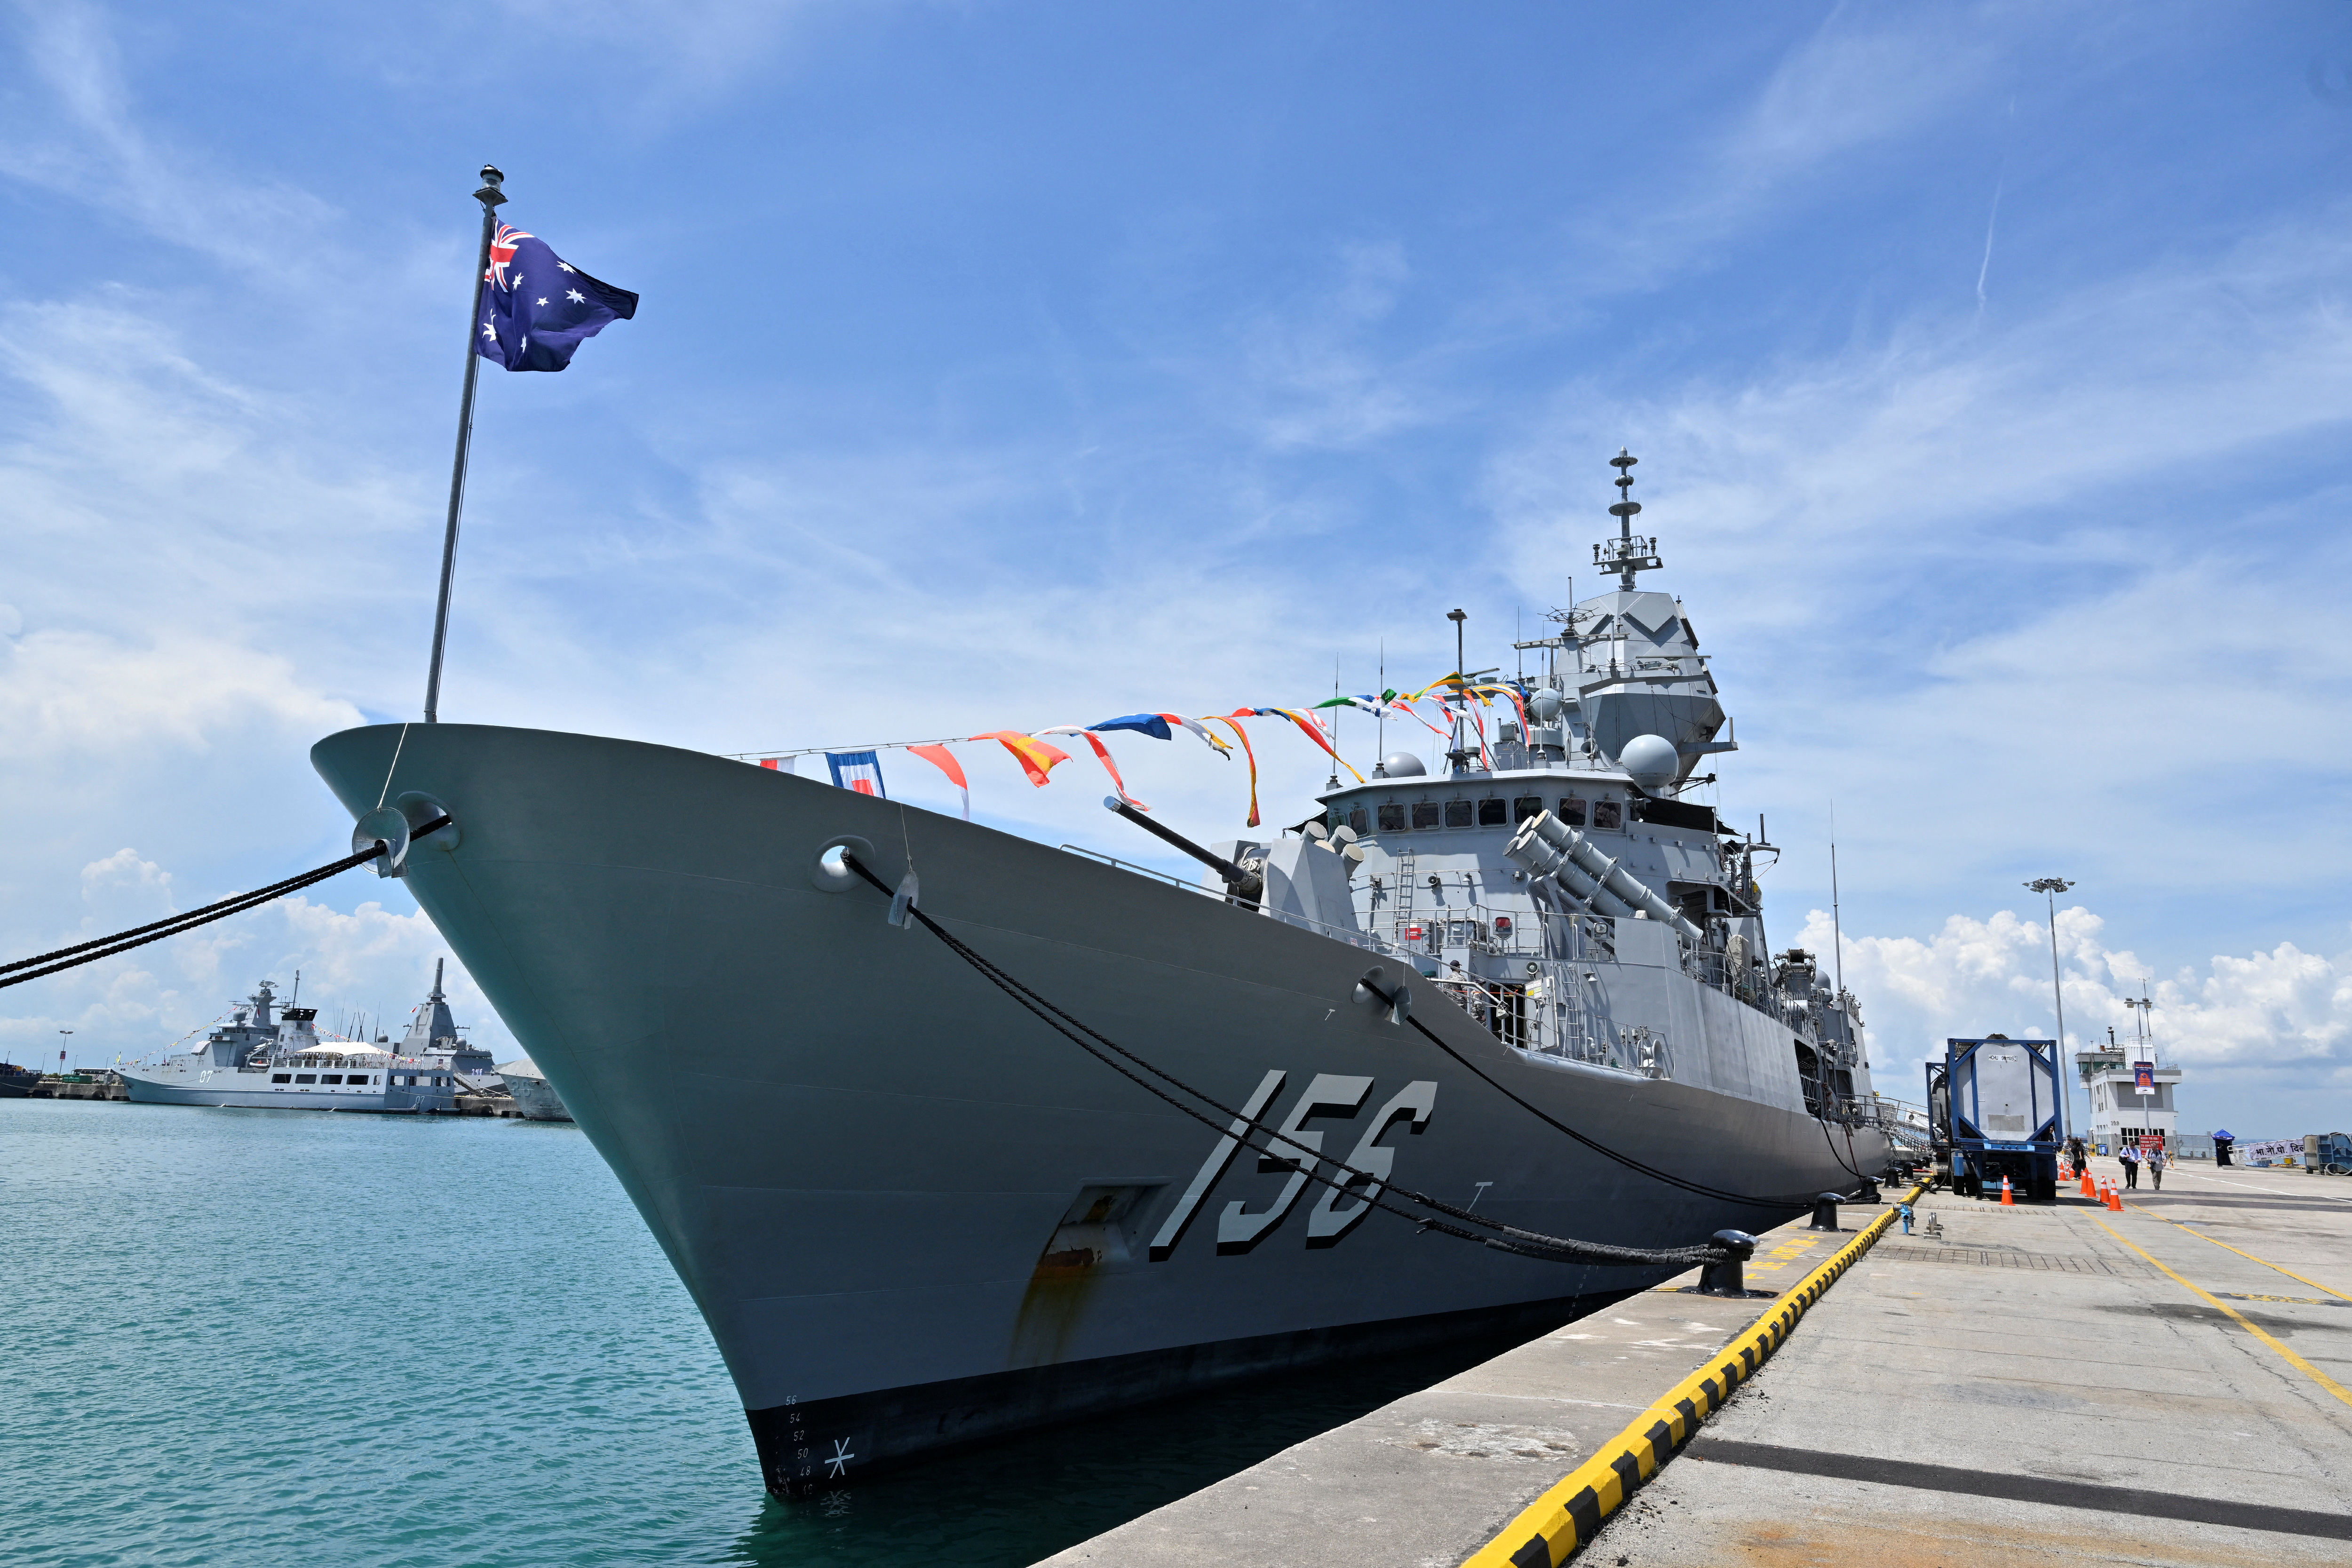 Royal Australian Navy vessel, HMAS Toowoomba, is docked at Changi Naval Base at the display of warships during IMDEX Asia 2023, a maritime defence exhibition in Singapore